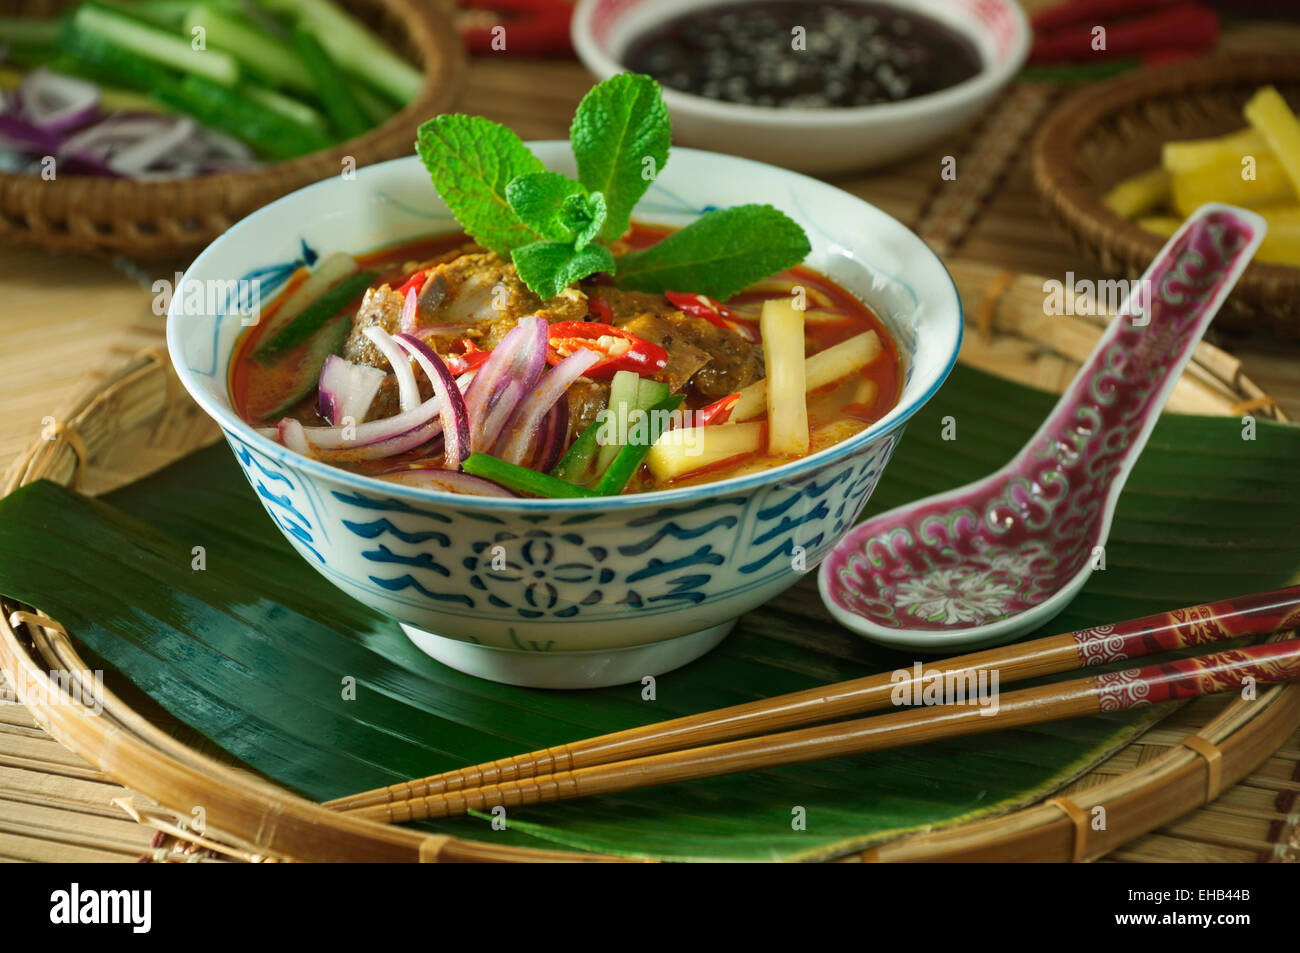 Assam laksa. Spicy noodle soup Malaysia Food Stock Photo